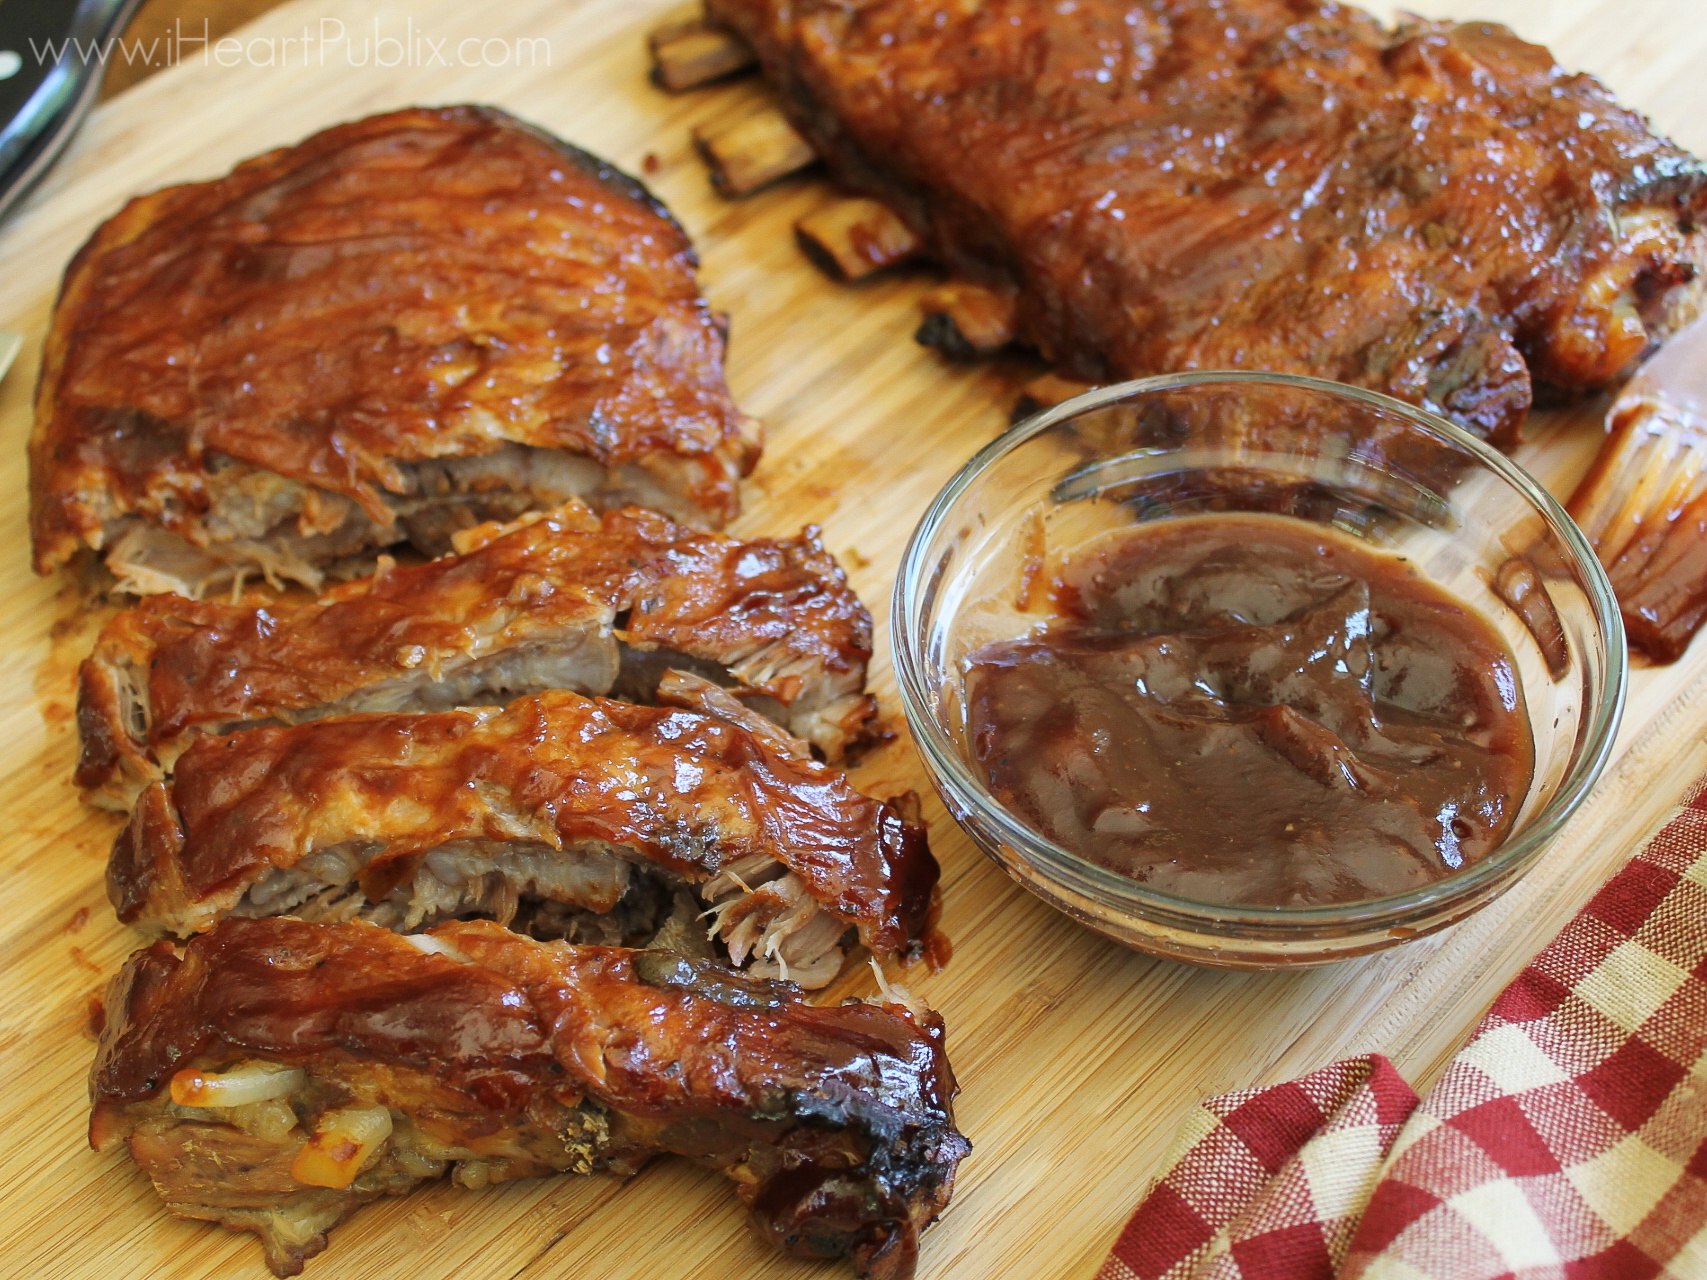 Easy Slow Cooker St. Louis Style Ribs - Super Meal With The Sales This Week At Publix